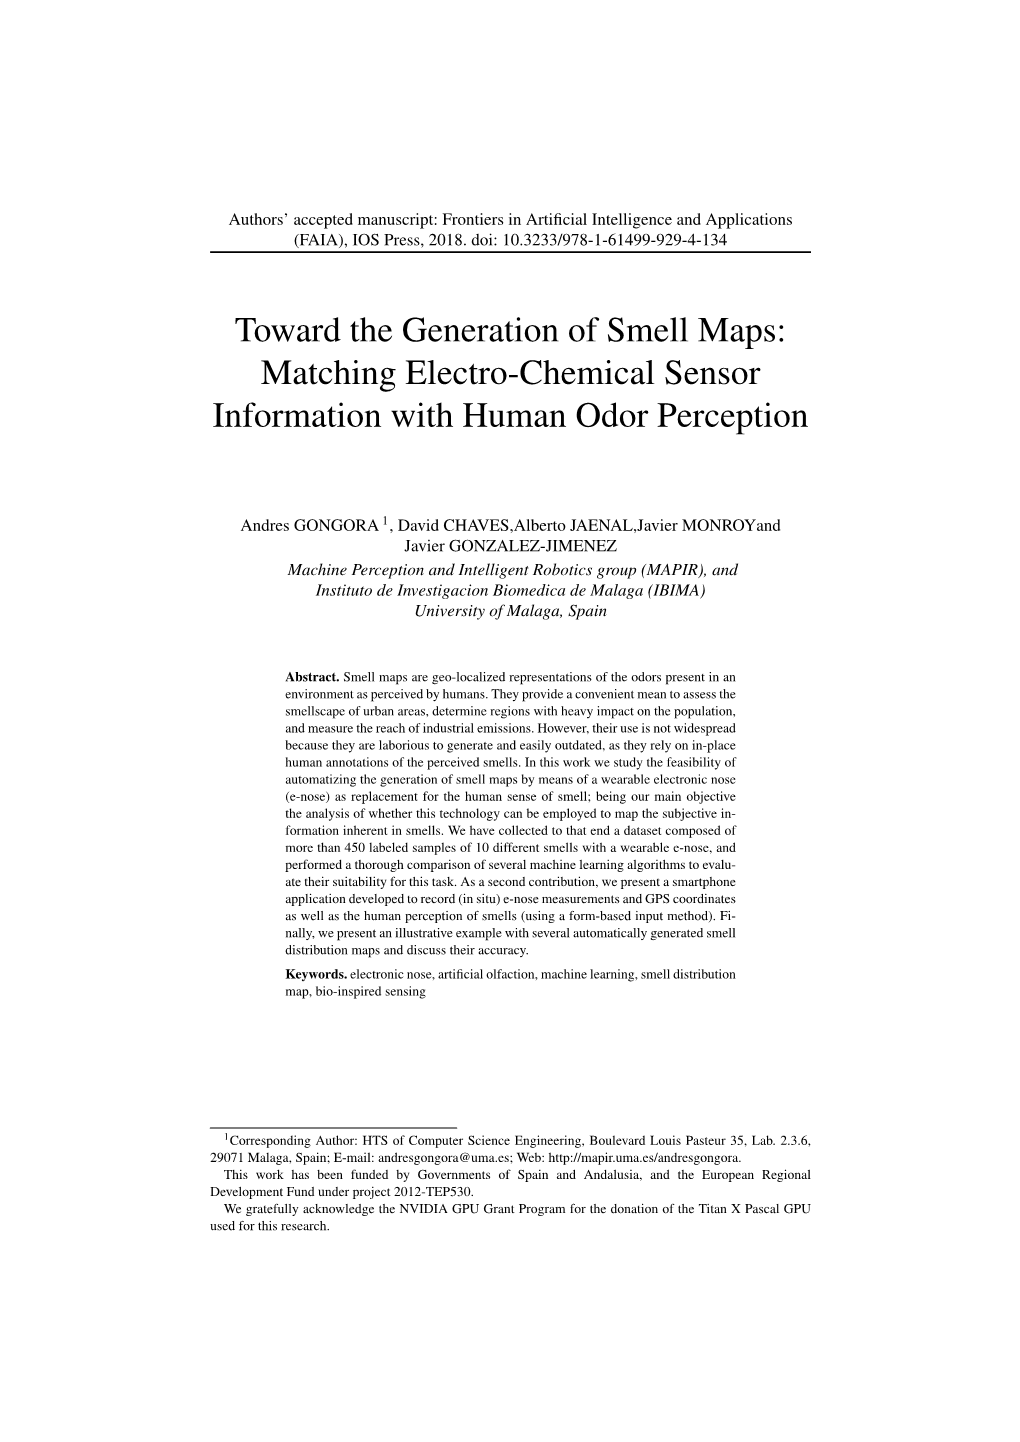 Toward the Generation of Smell Maps: Matching Electro-Chemical Sensor Information with Human Odor Perception